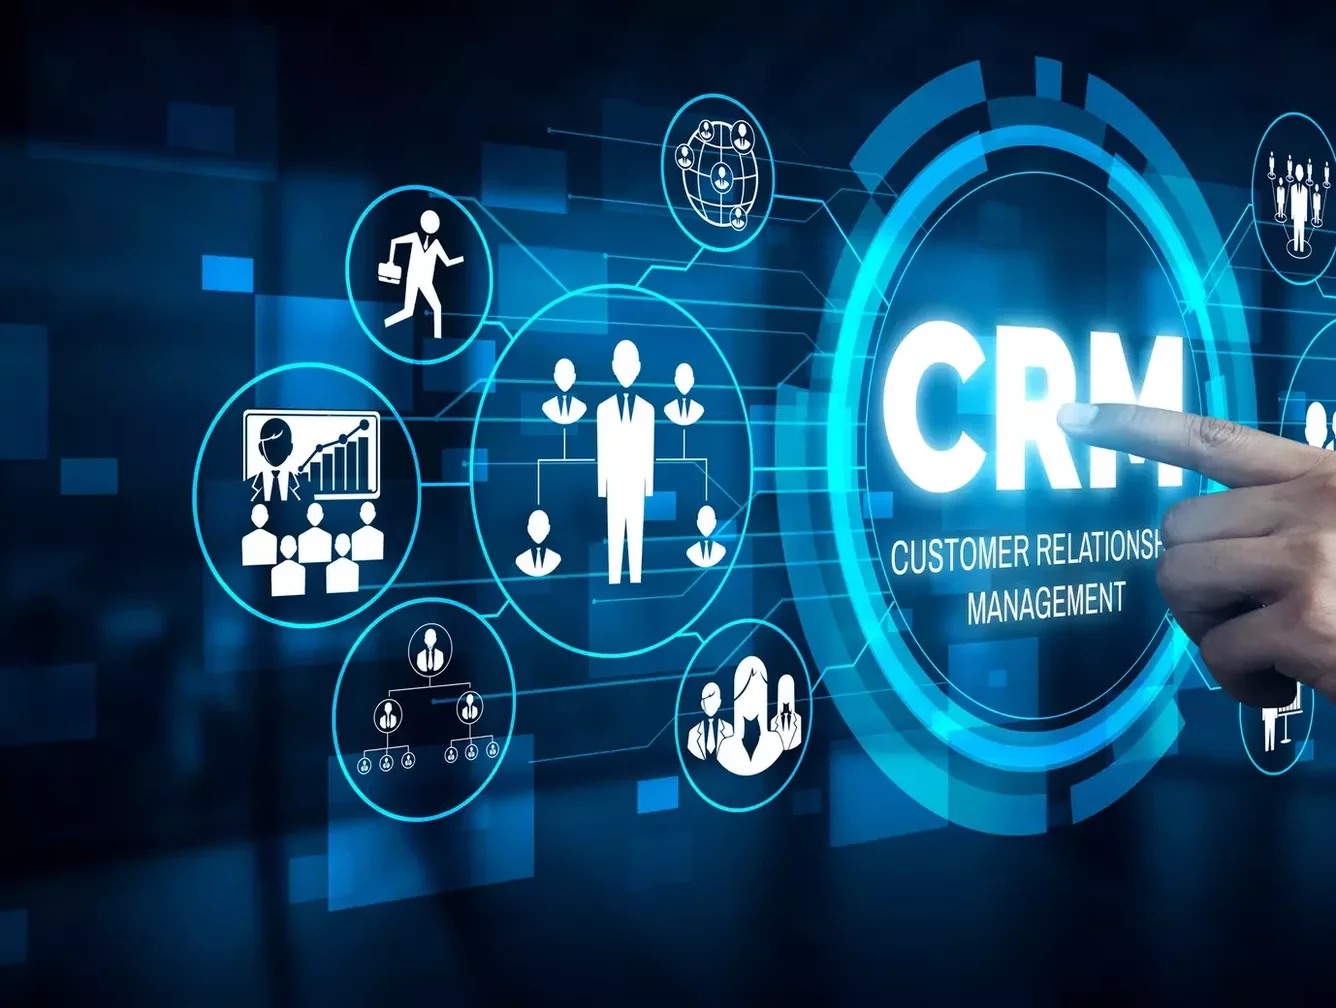 Odoo CRM: The real customer centric CRM